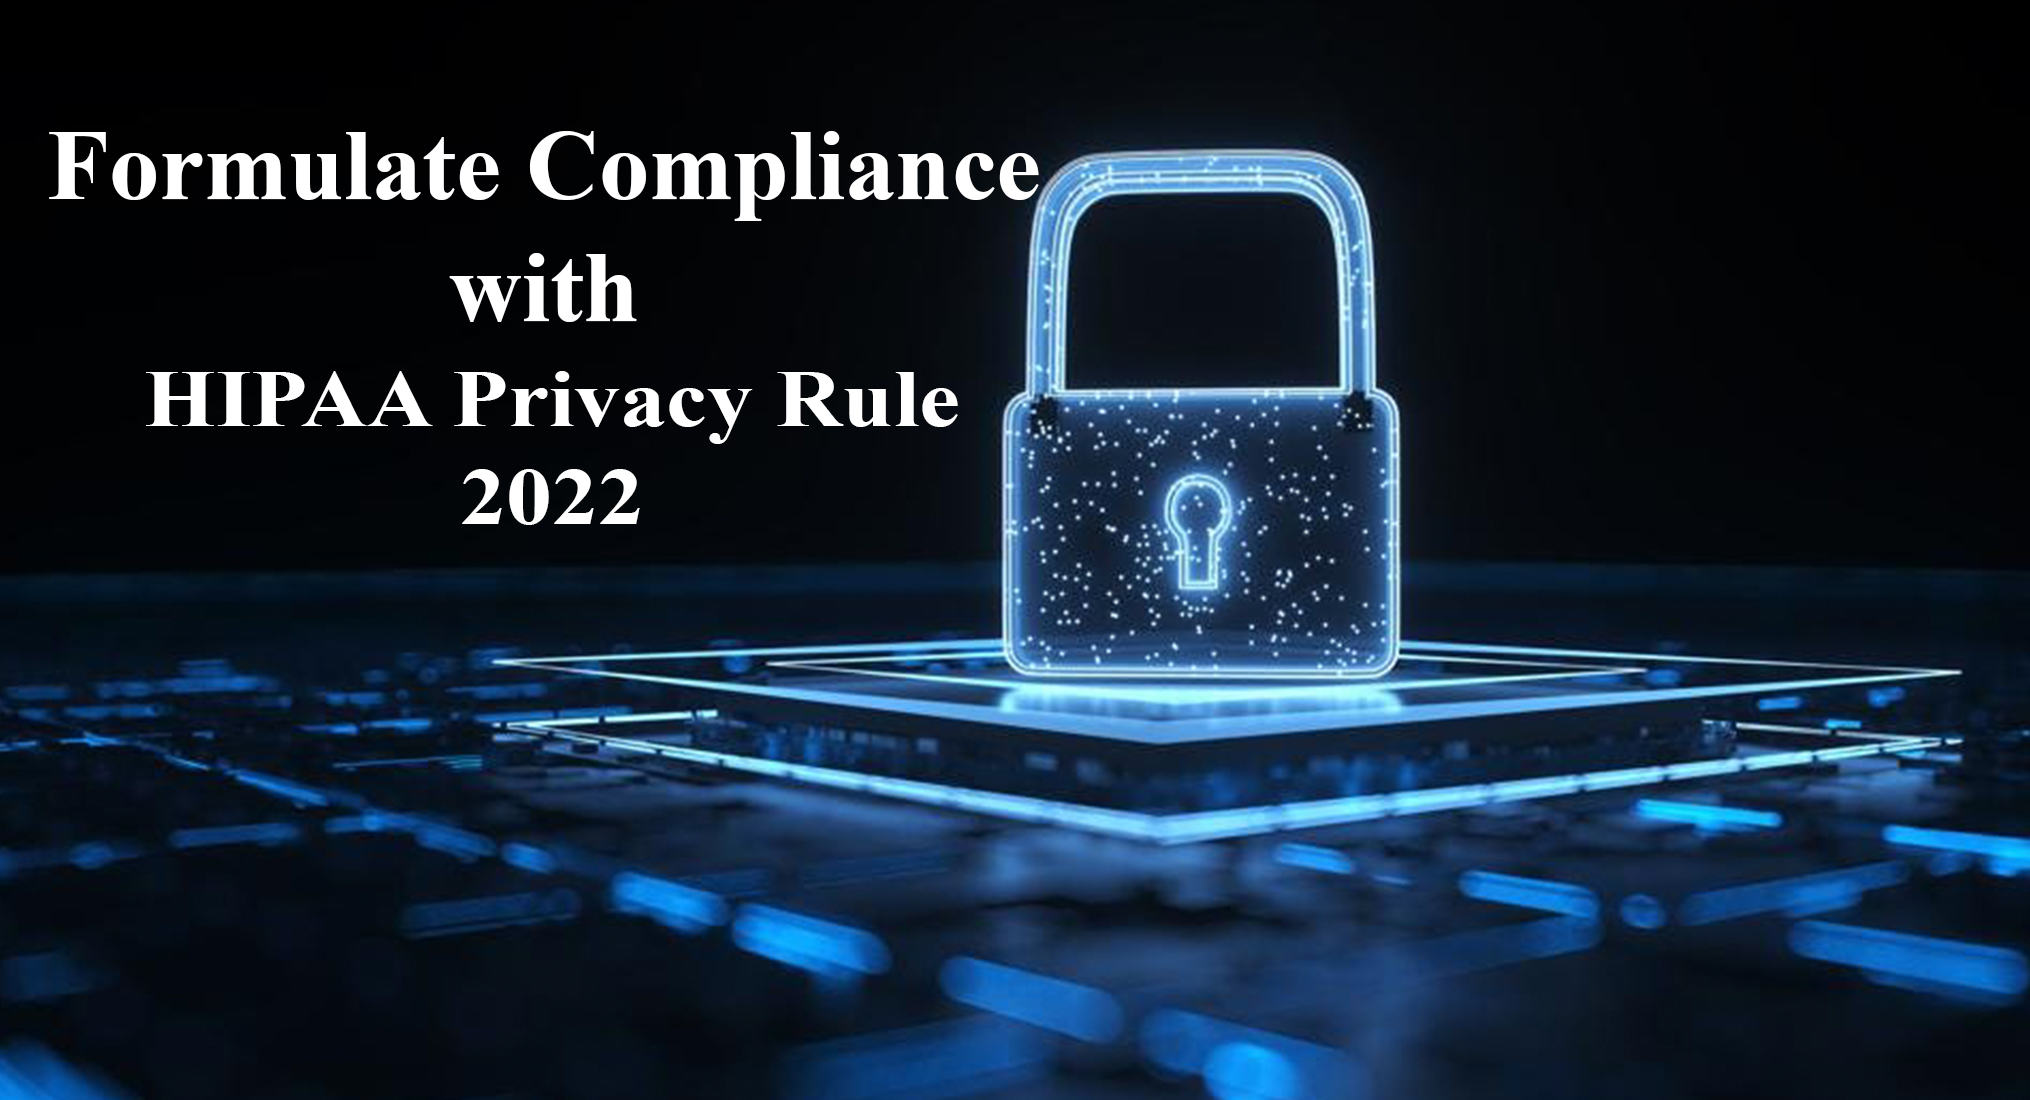 Formulate Compliance with HIPAA Privacy Rule 2022